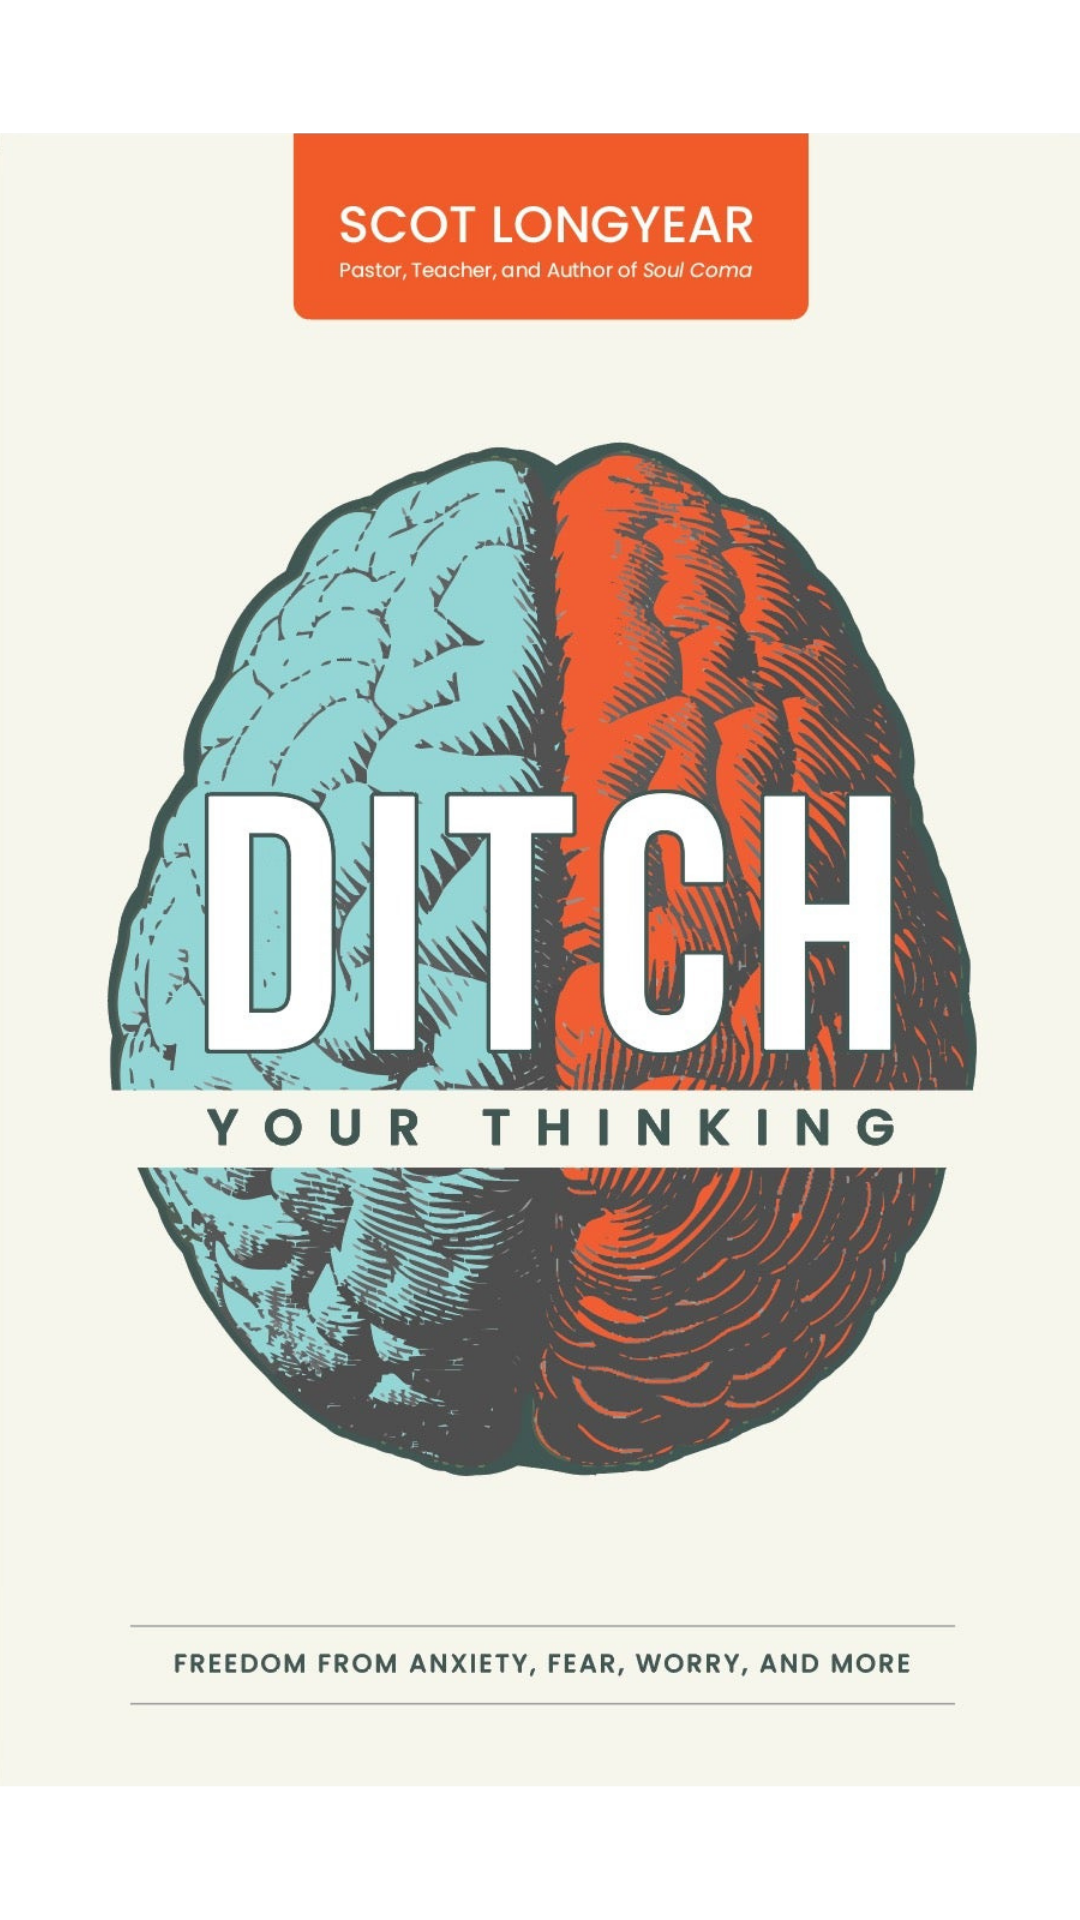 DITCH YOUR THINKING